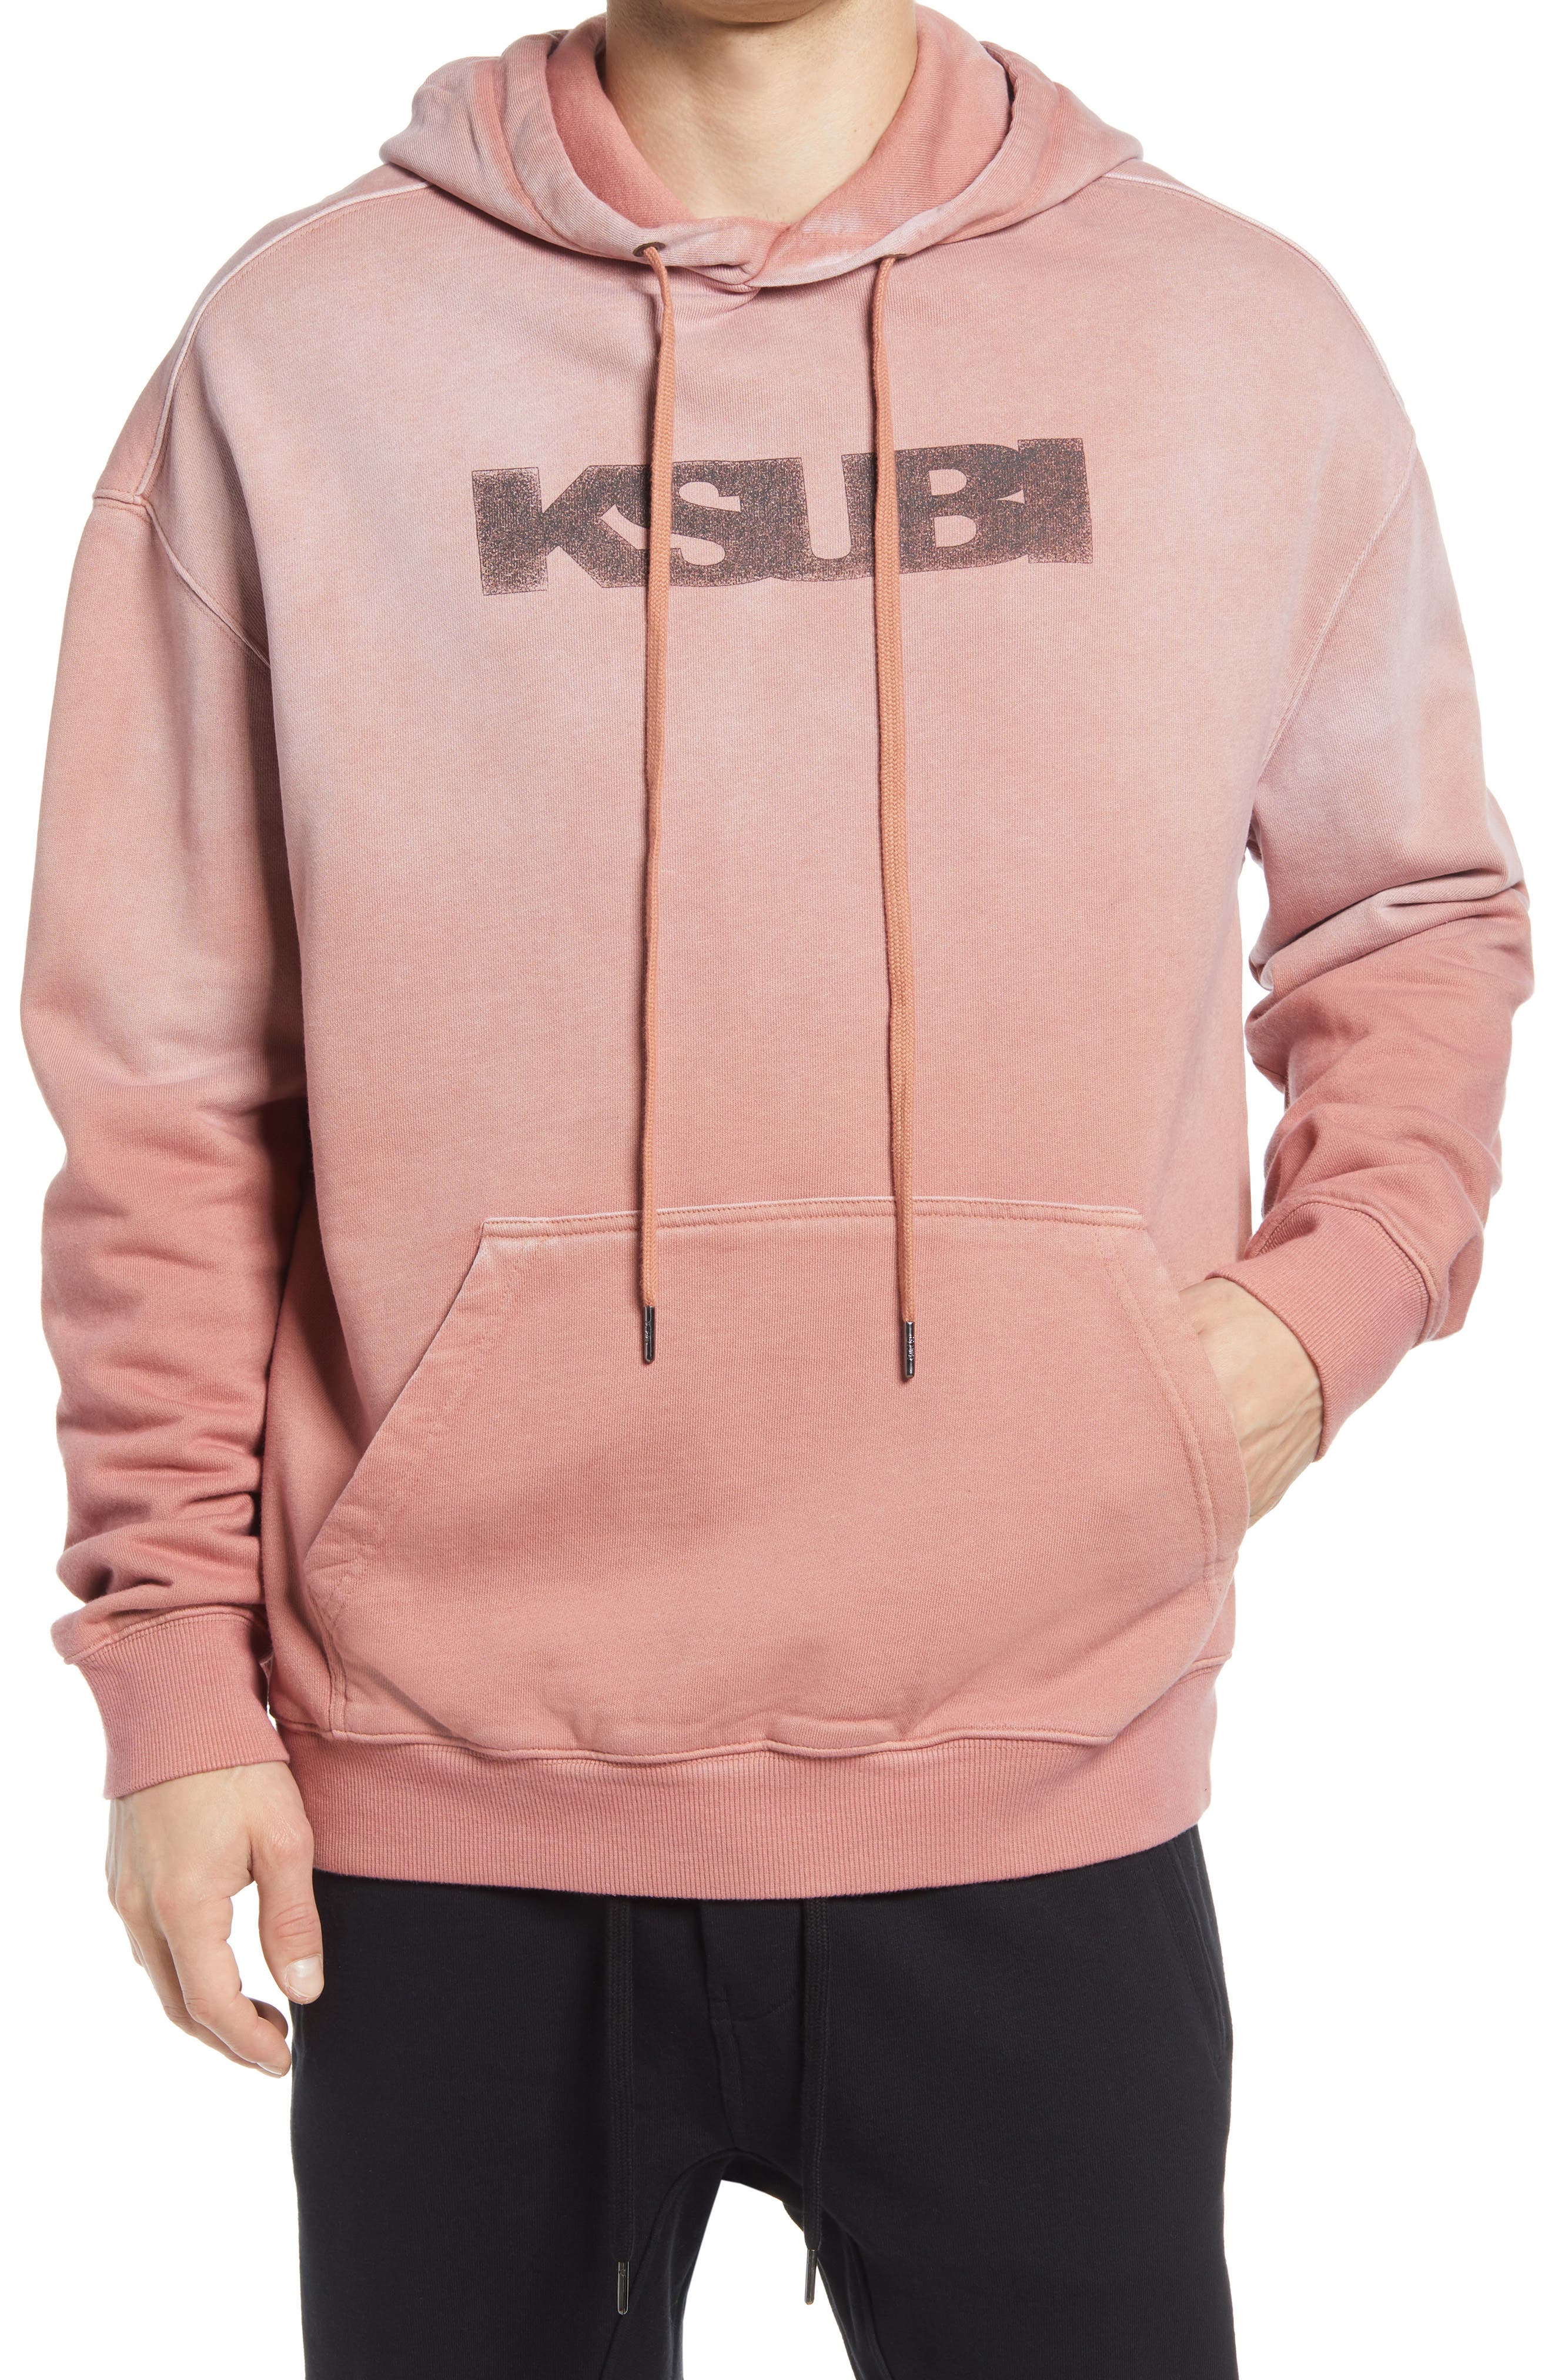 Ksubi Sign of the Times Biggie Graphic Hoodie in Red at Nordstrom, Size Large